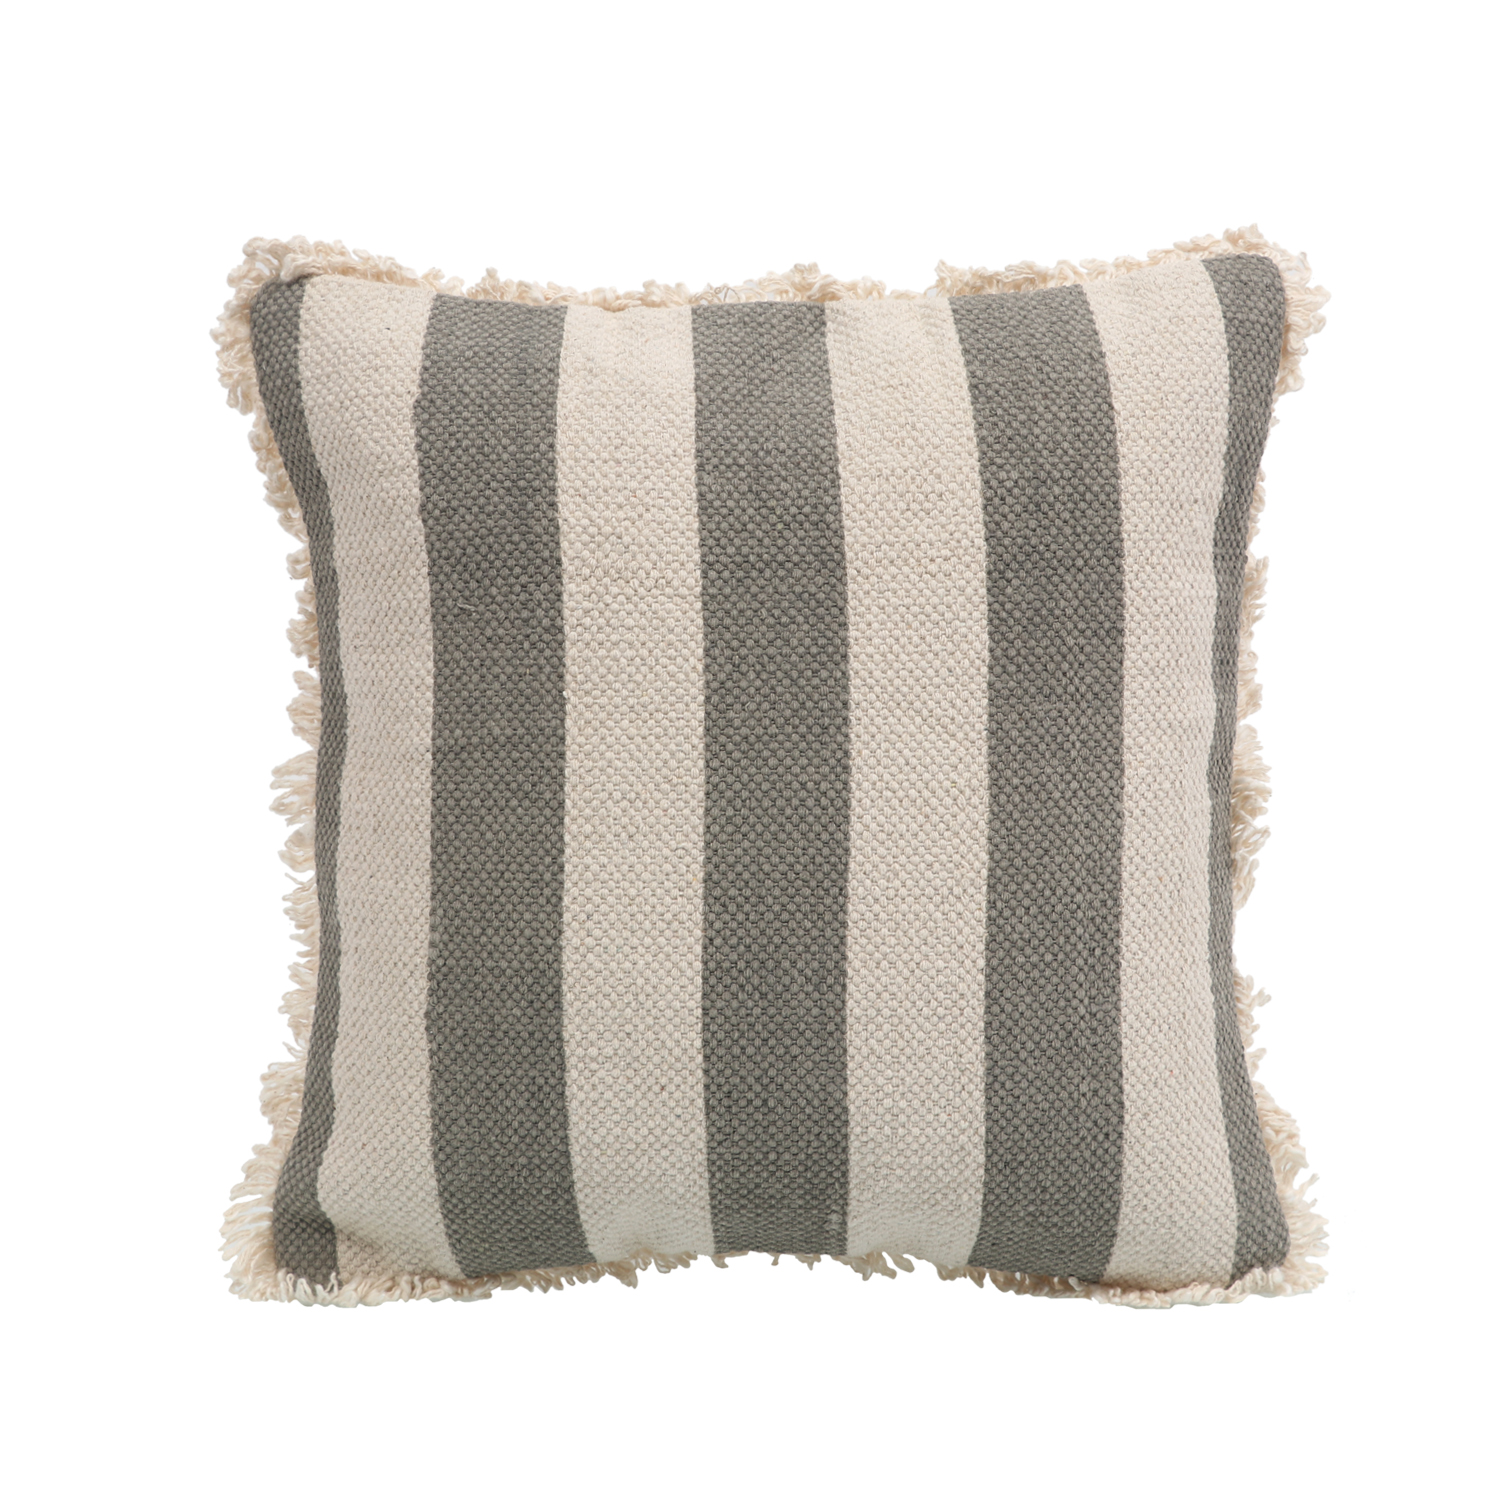 Printed Stripe Dark Gray Cushions Covers with fringes 14X14 Inch